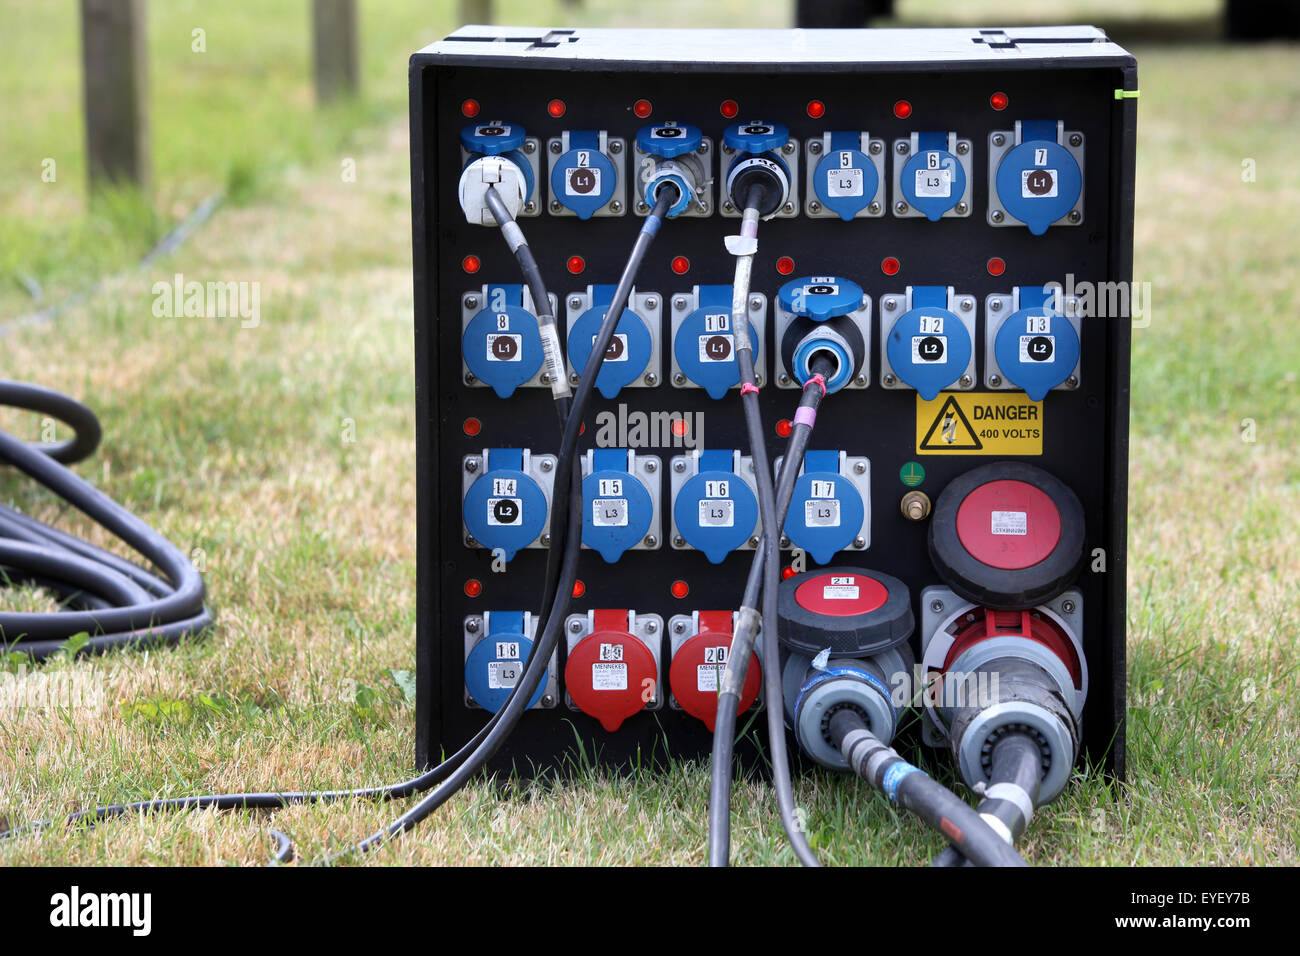 Outdoors electricity power management junction box at an outdoor event Stock Photo